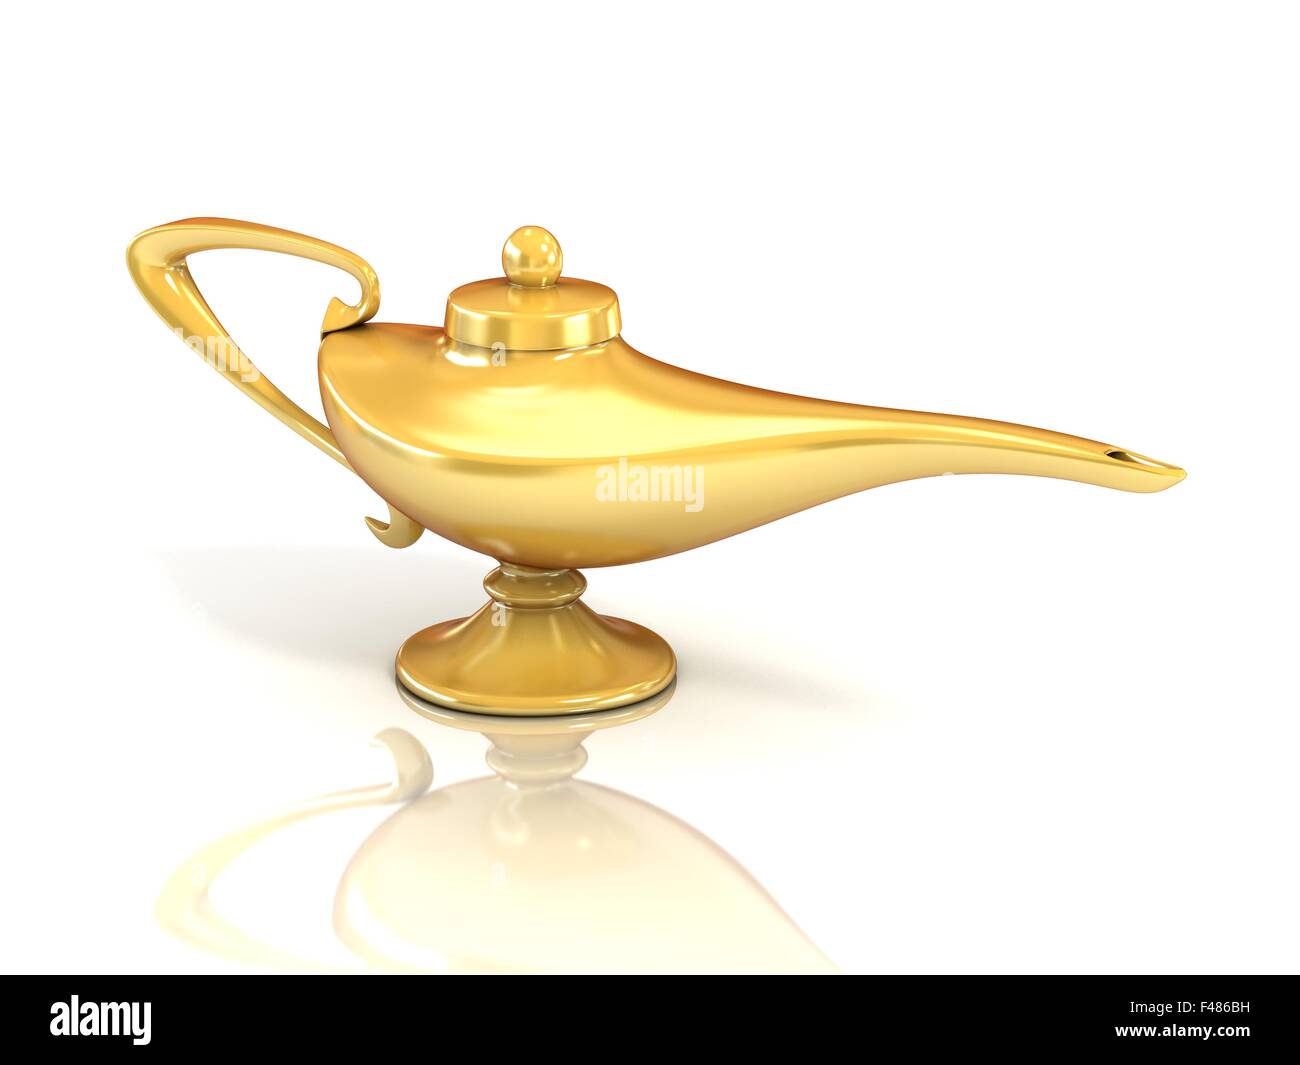 Aladdin ornate brass oil genie lamp with handle on a round